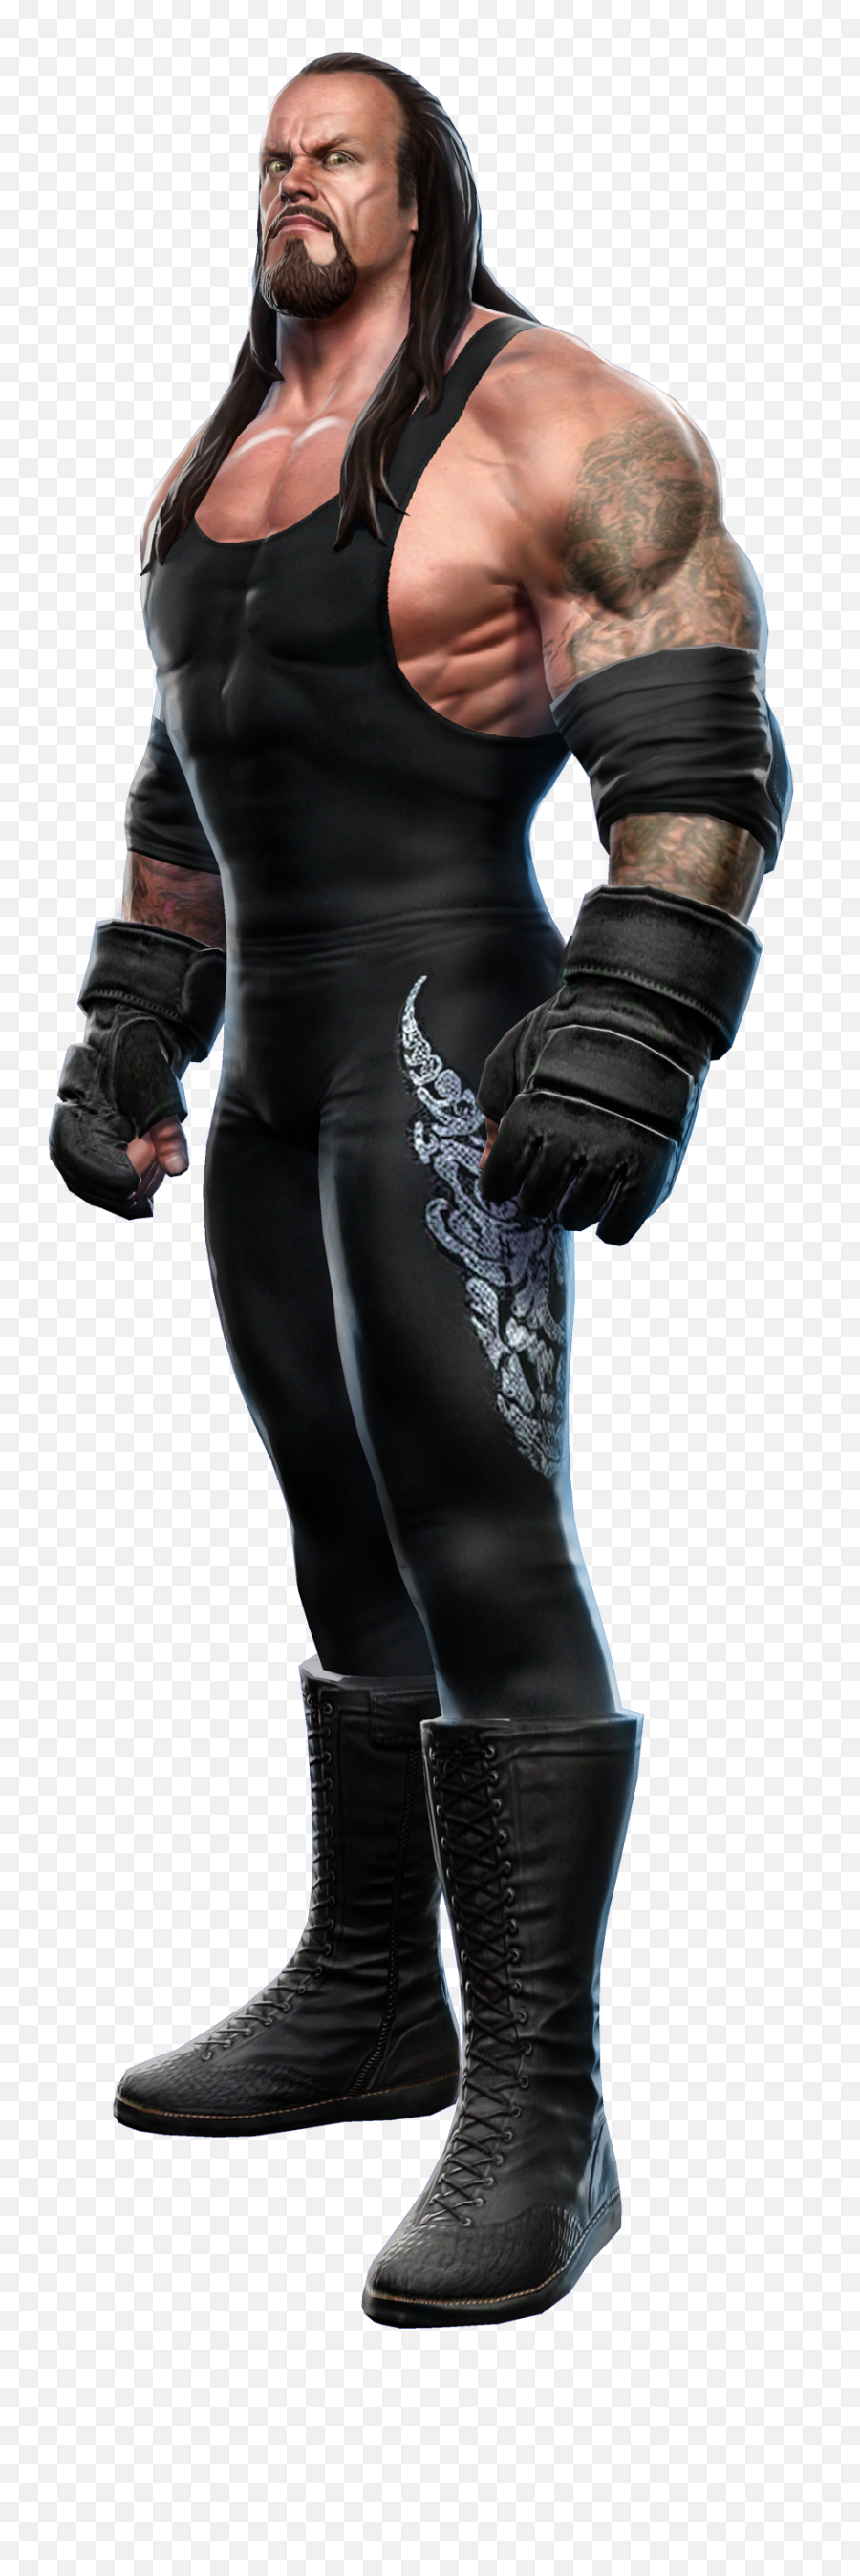 The Undertaker Png